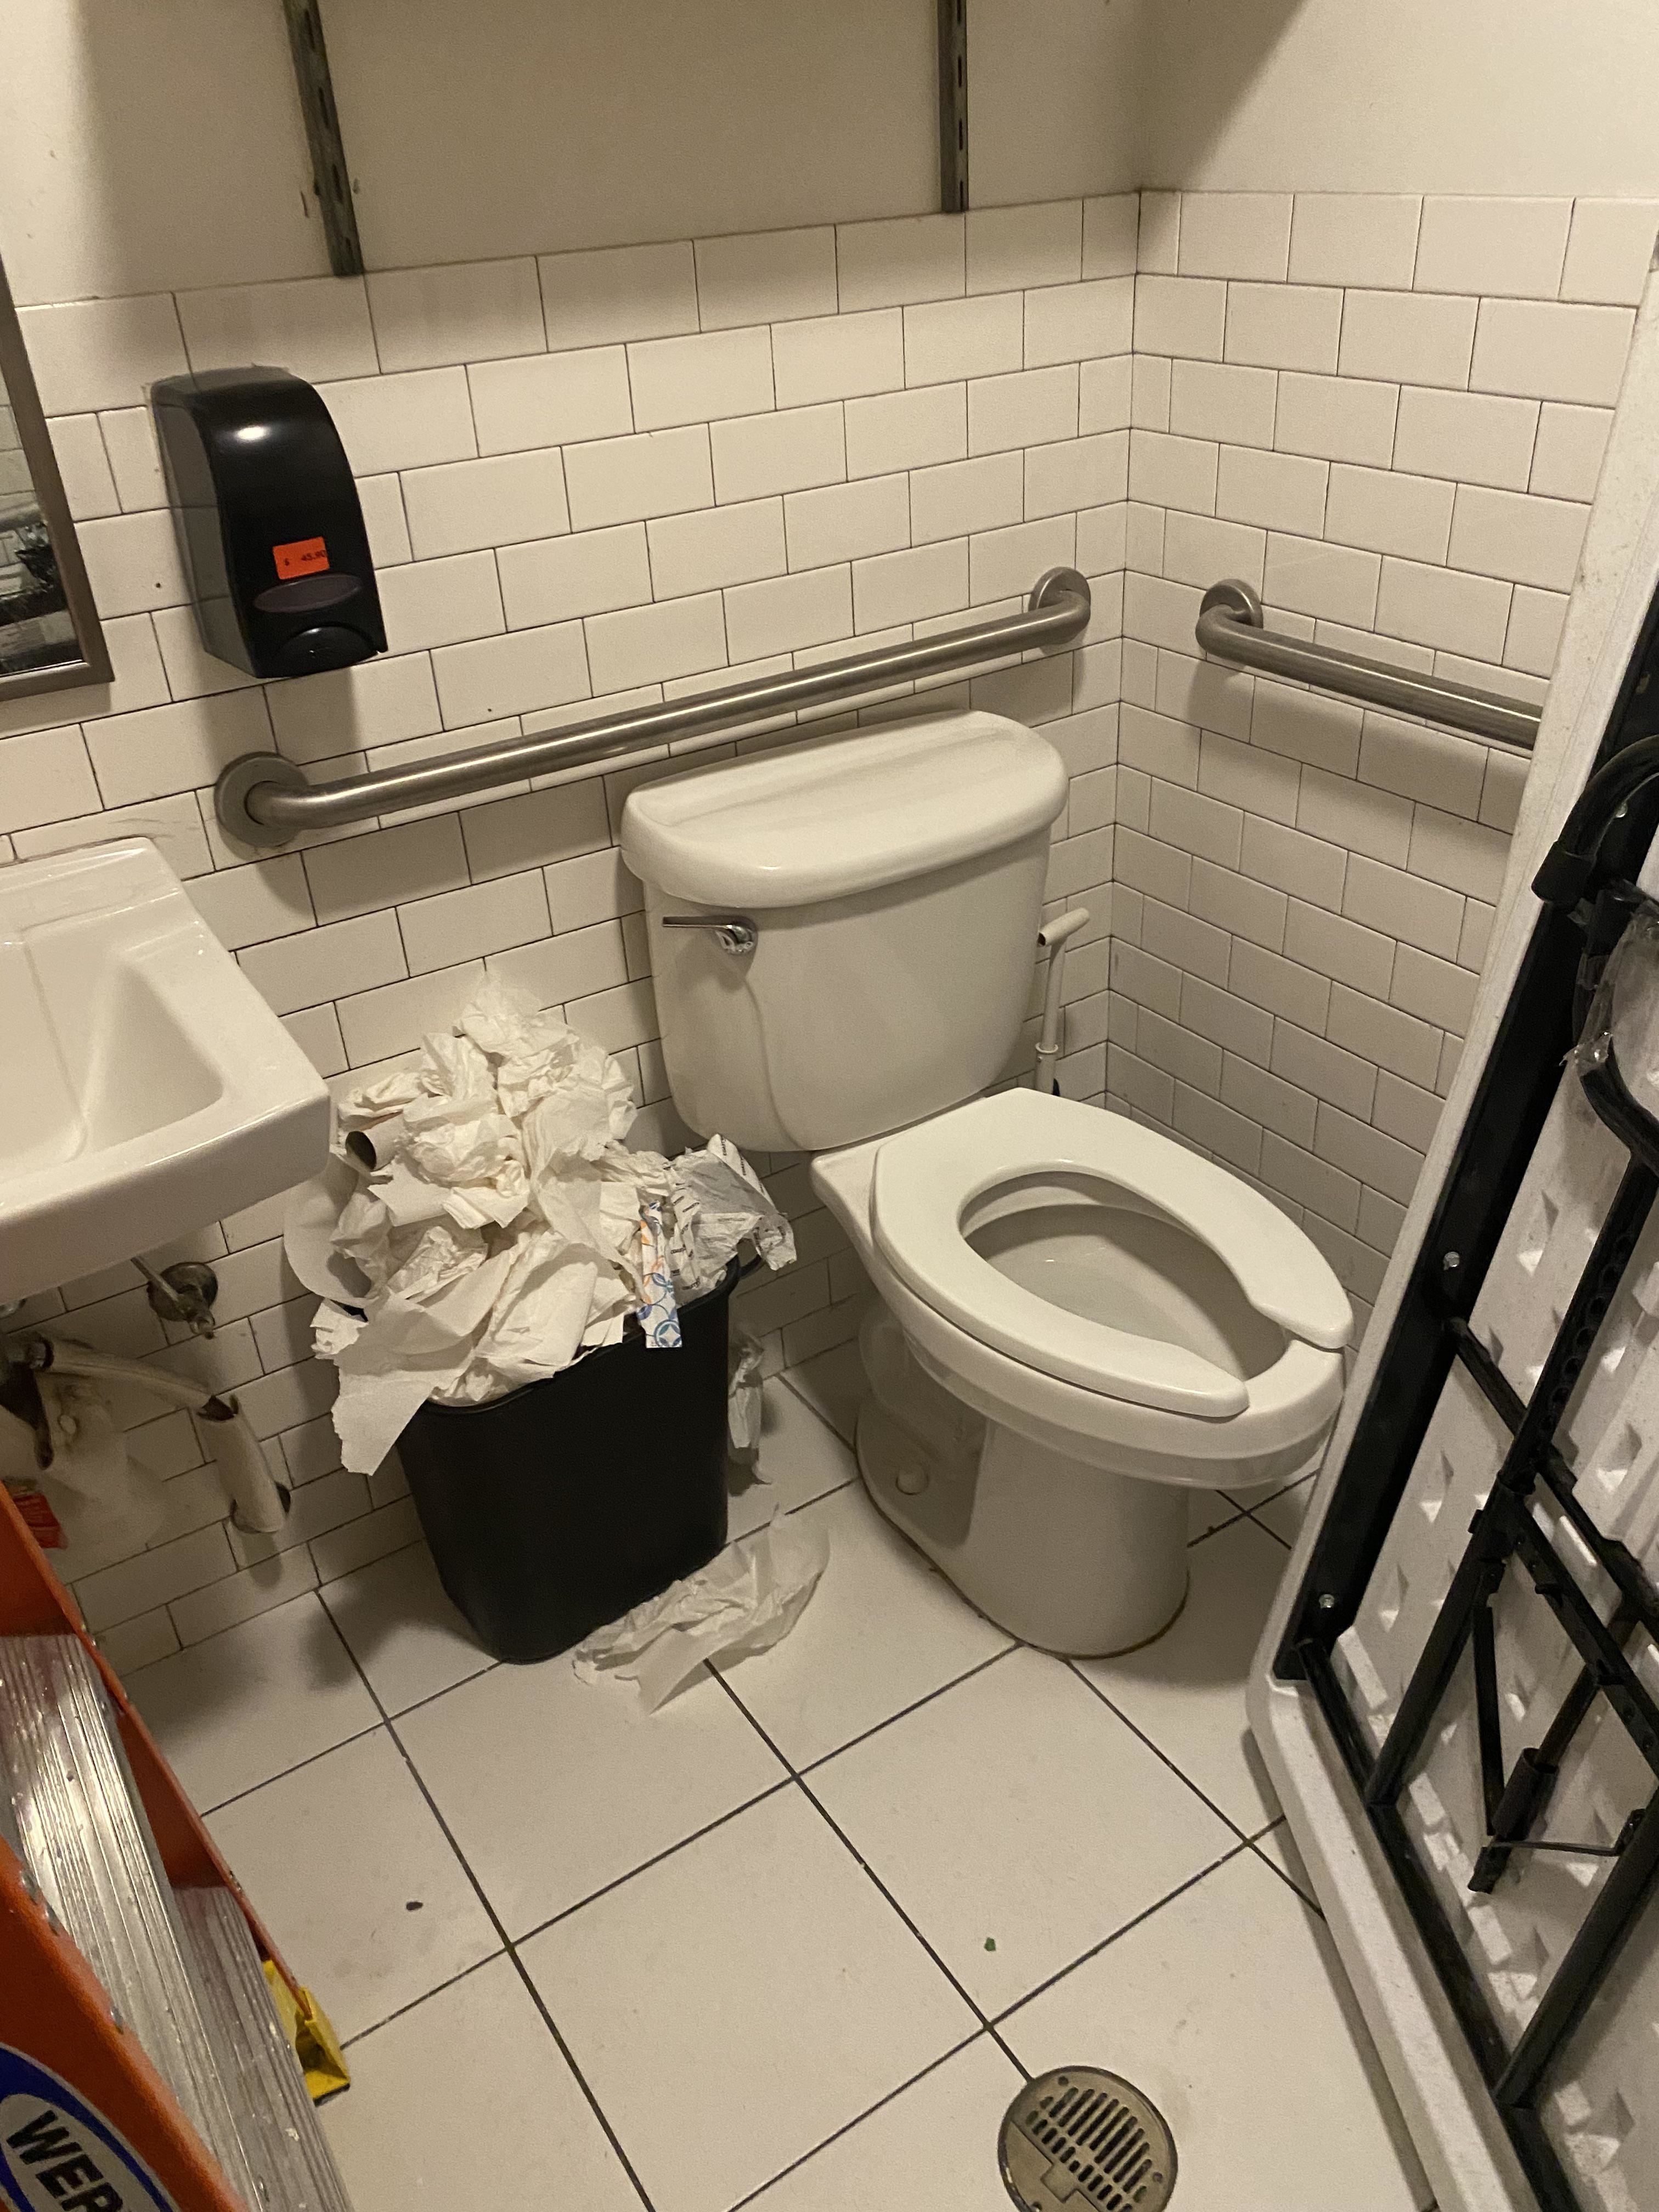 An overflowing bathroom trash can beside a toilet, with paper waste on the floor and a sink nearby